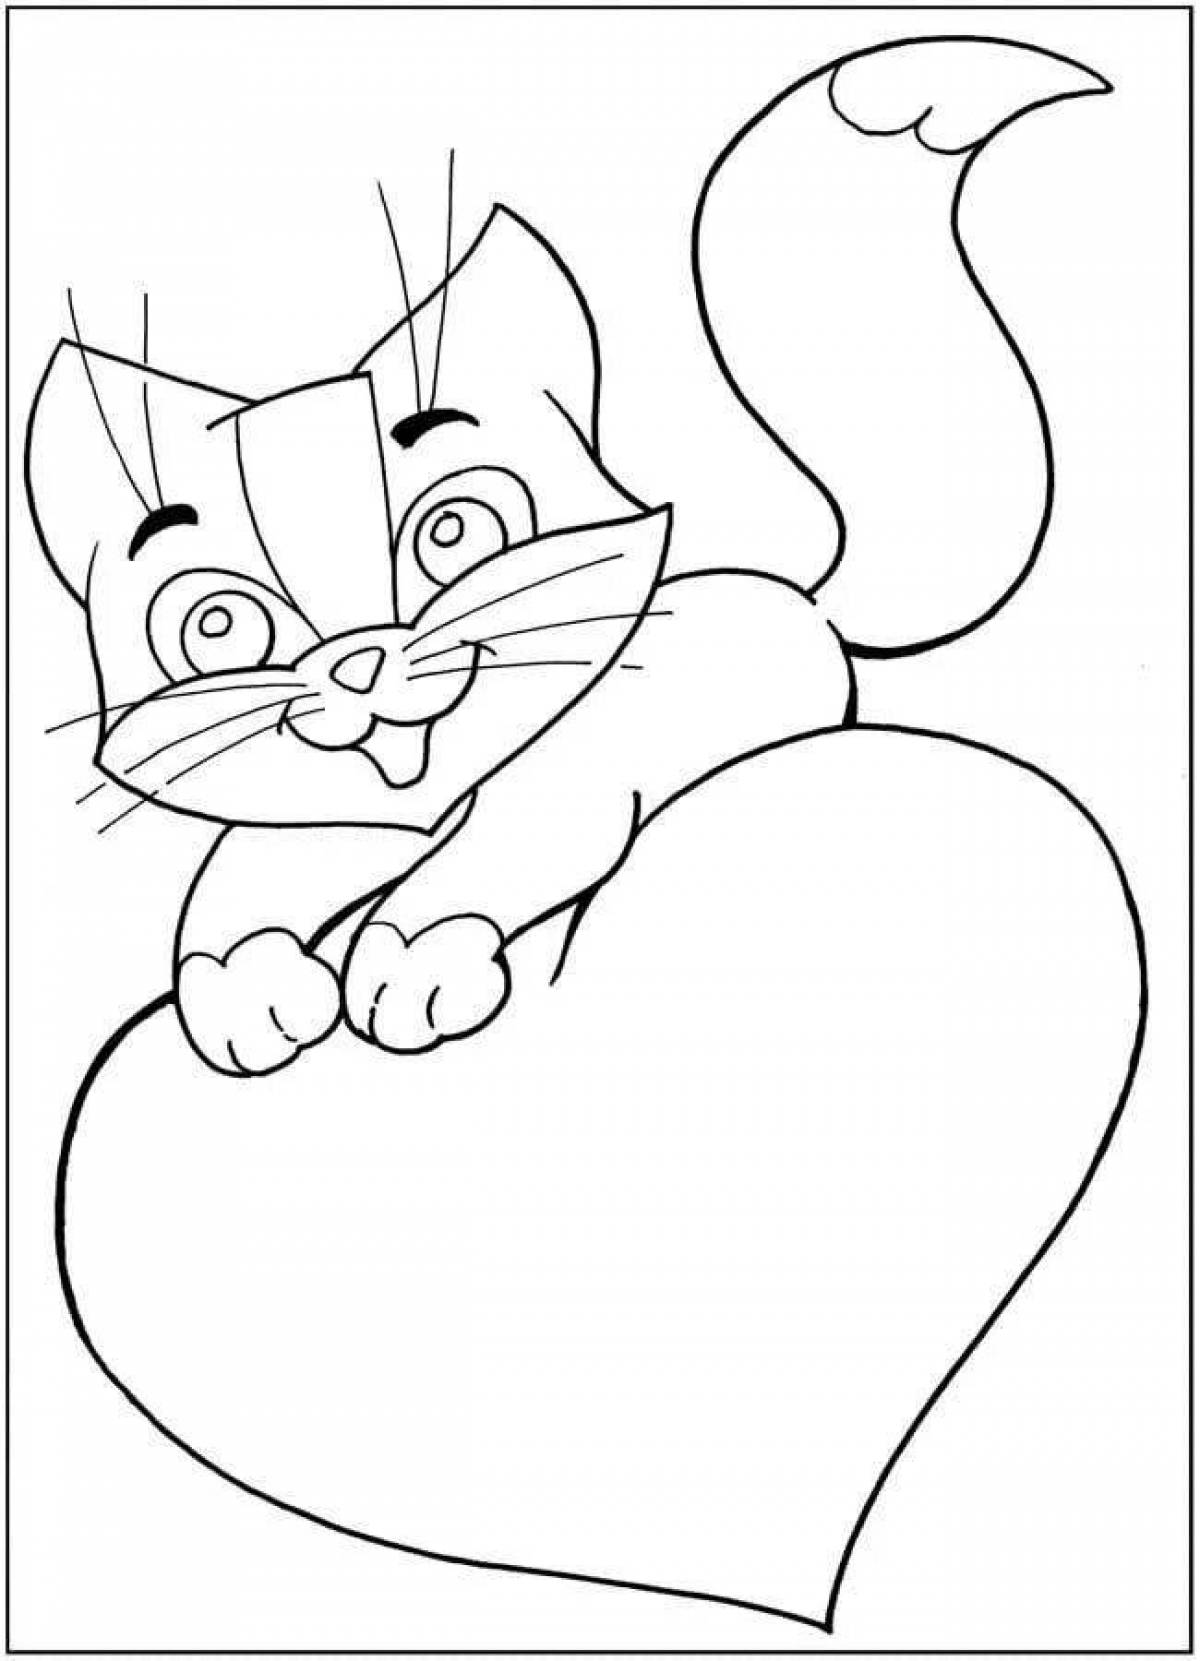 Coloring page smiling cat with a heart